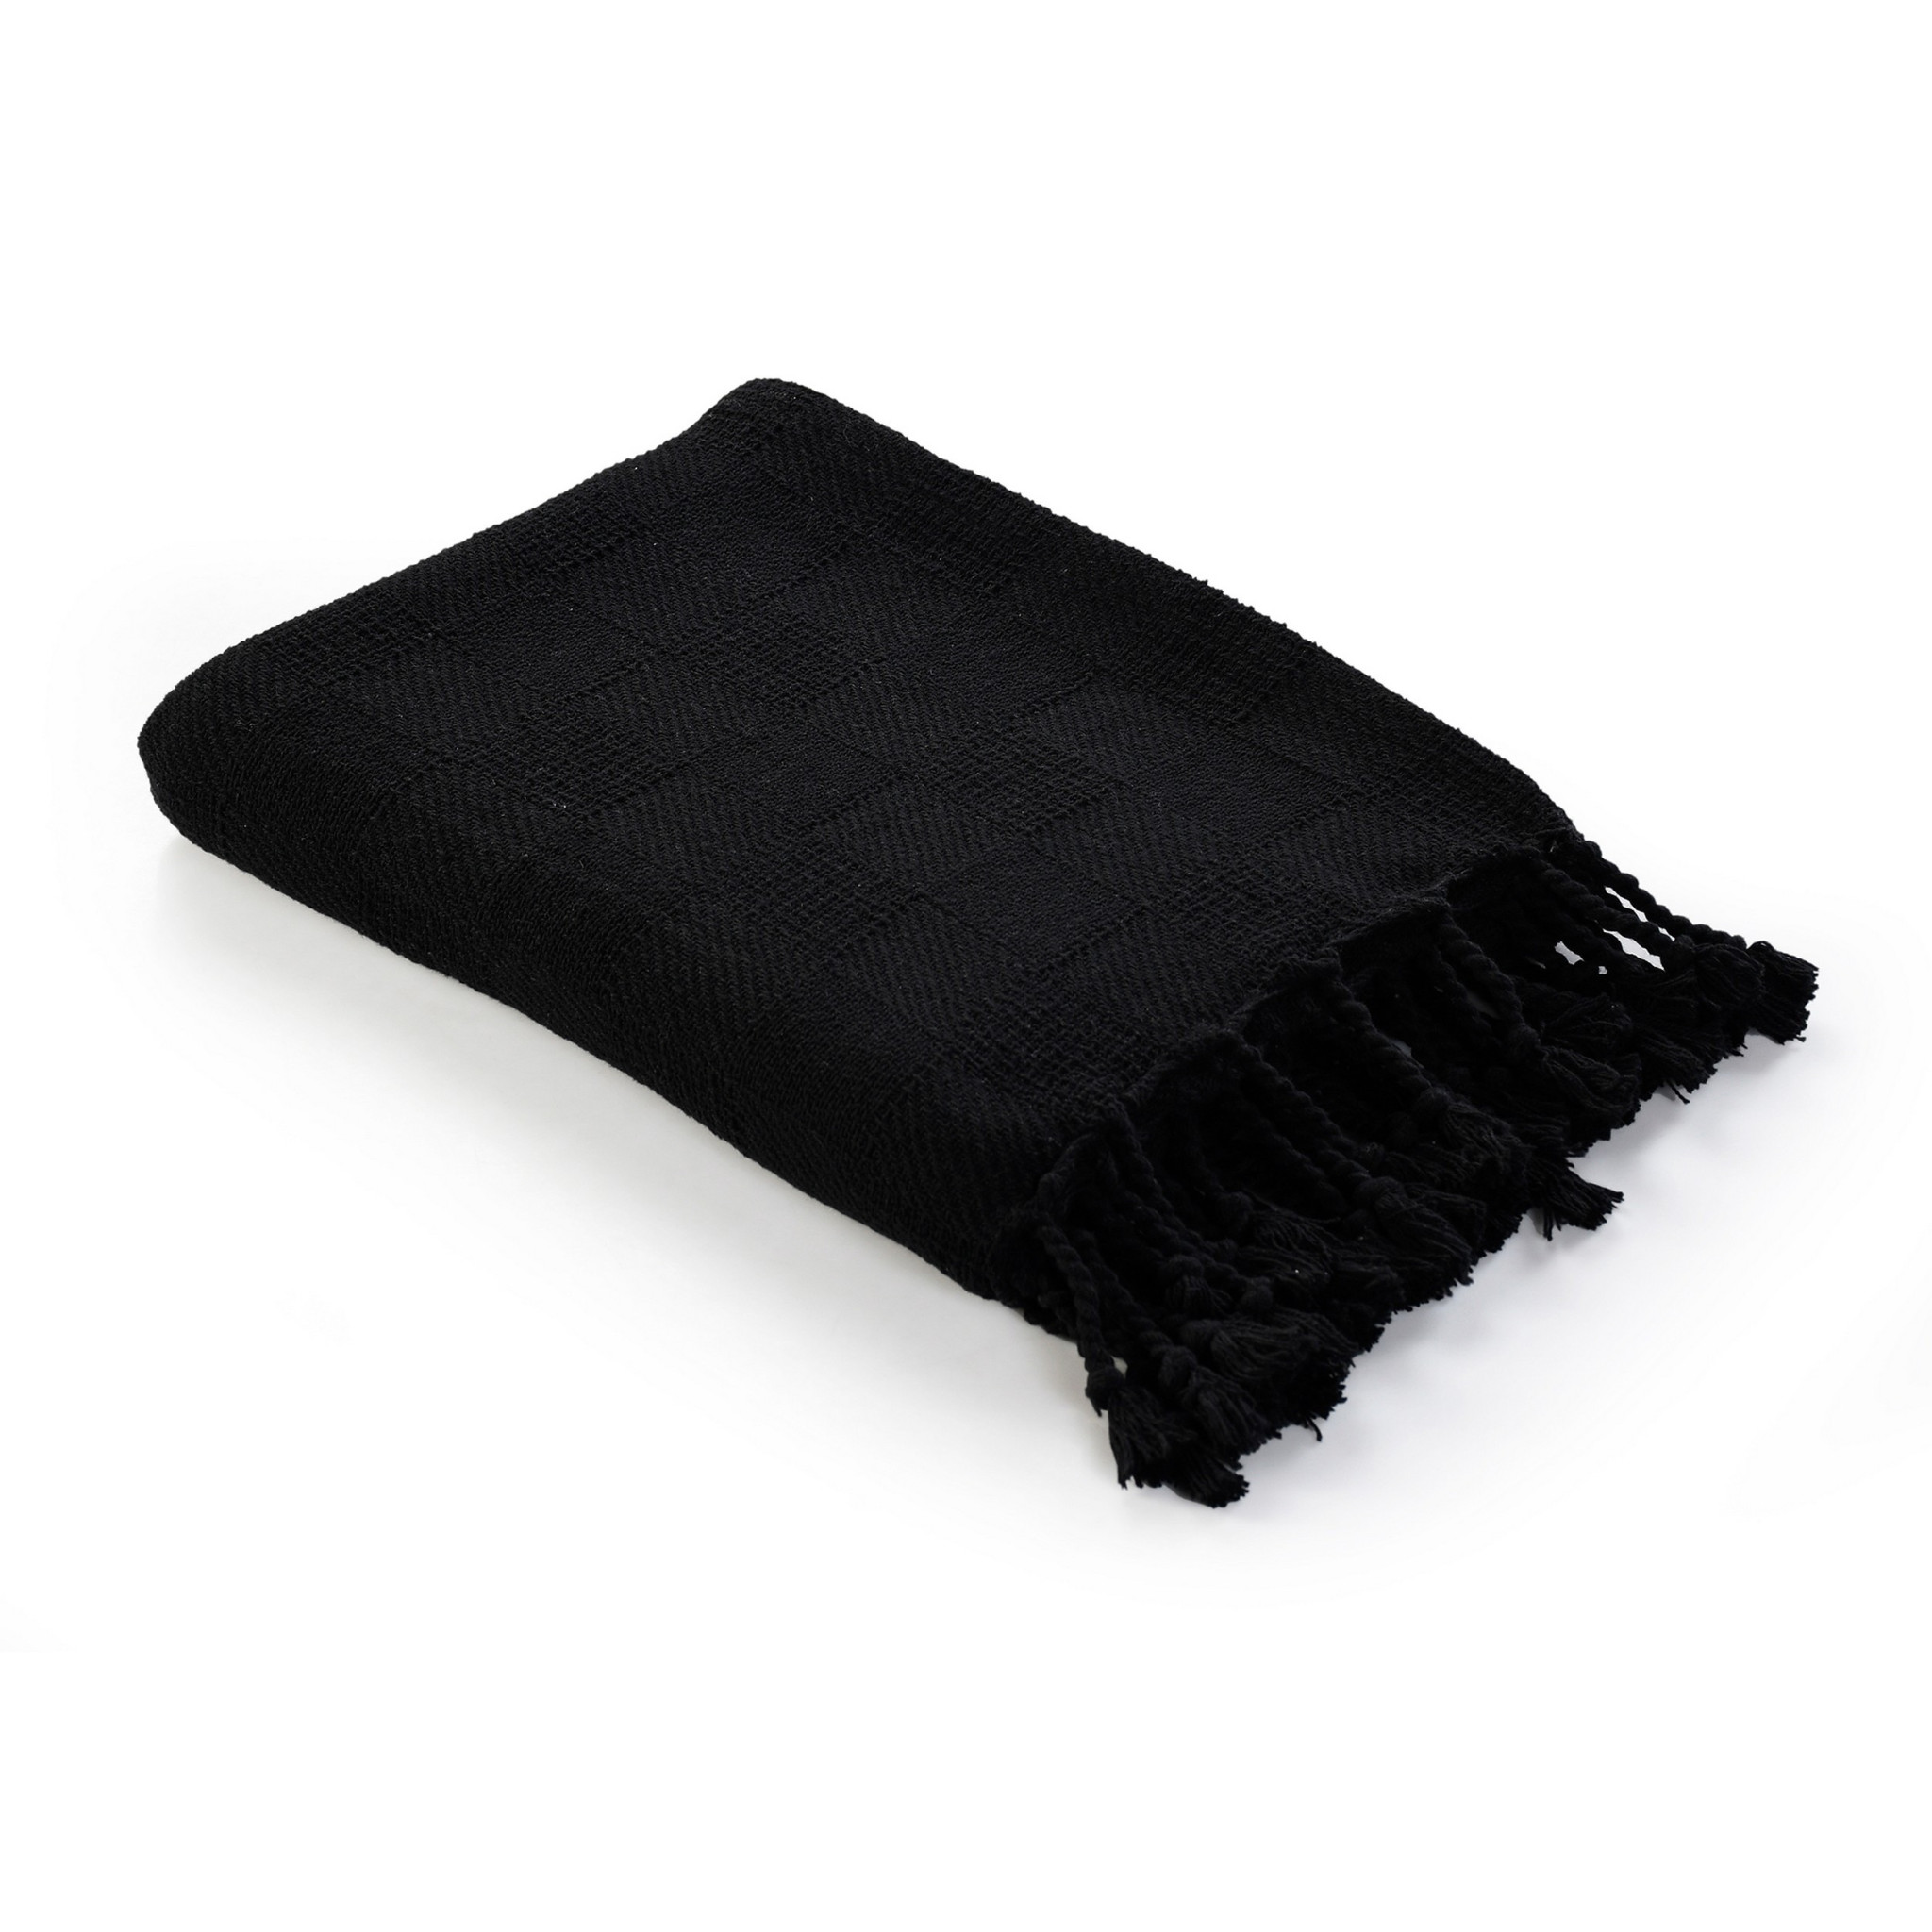 Black Woven Cotton Solid Color Throw Blanket-516563-1